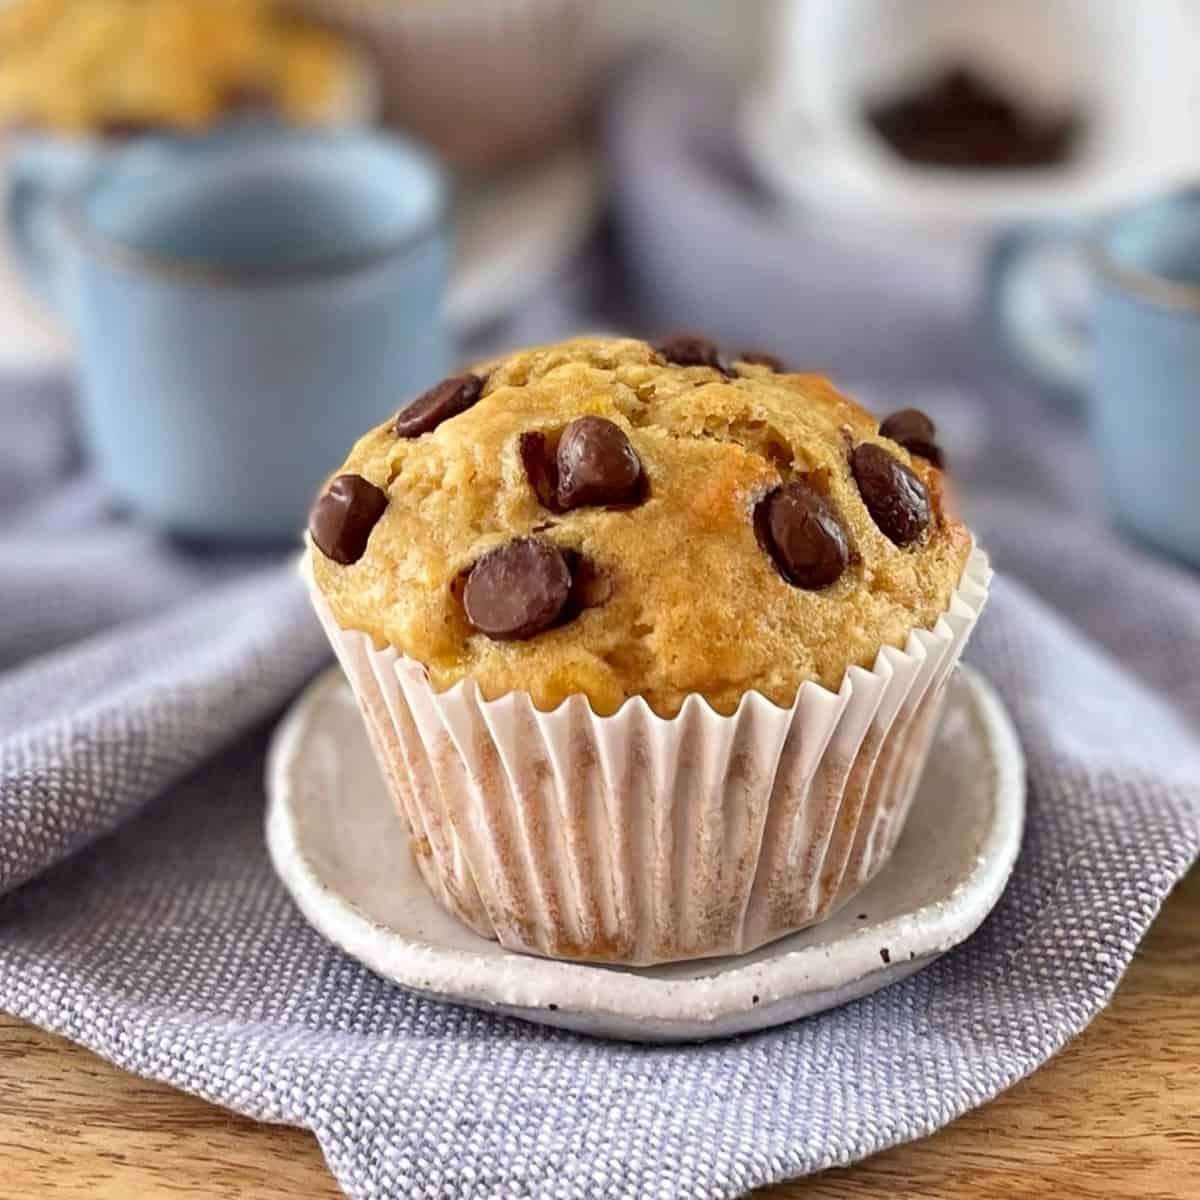 Banana muffin with chocolate chips sitting on a wooden board with tea cups in the background.